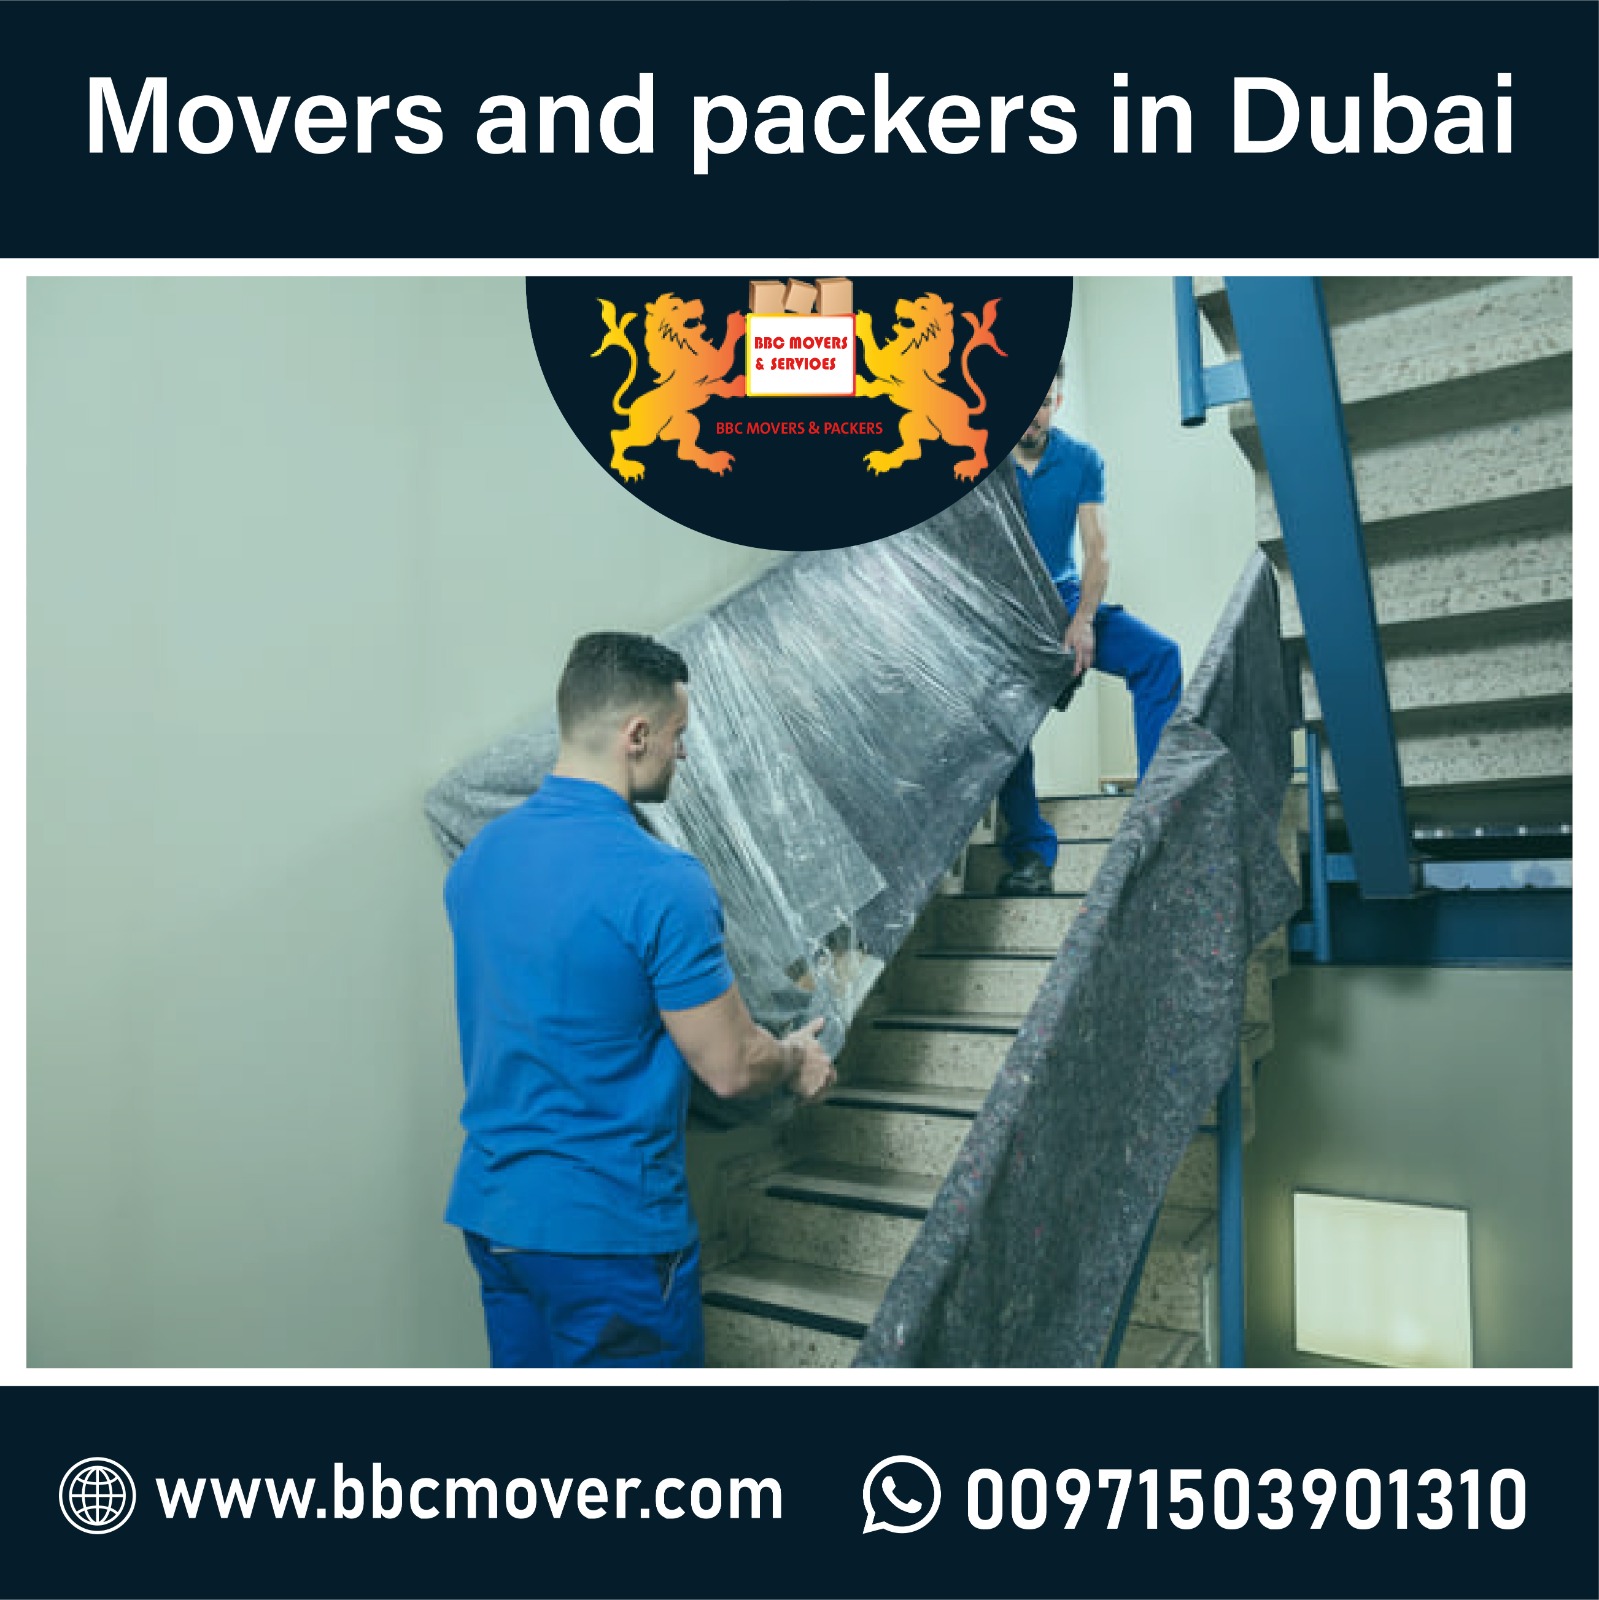 Movers and Packing Services Company in Dubai, UAE